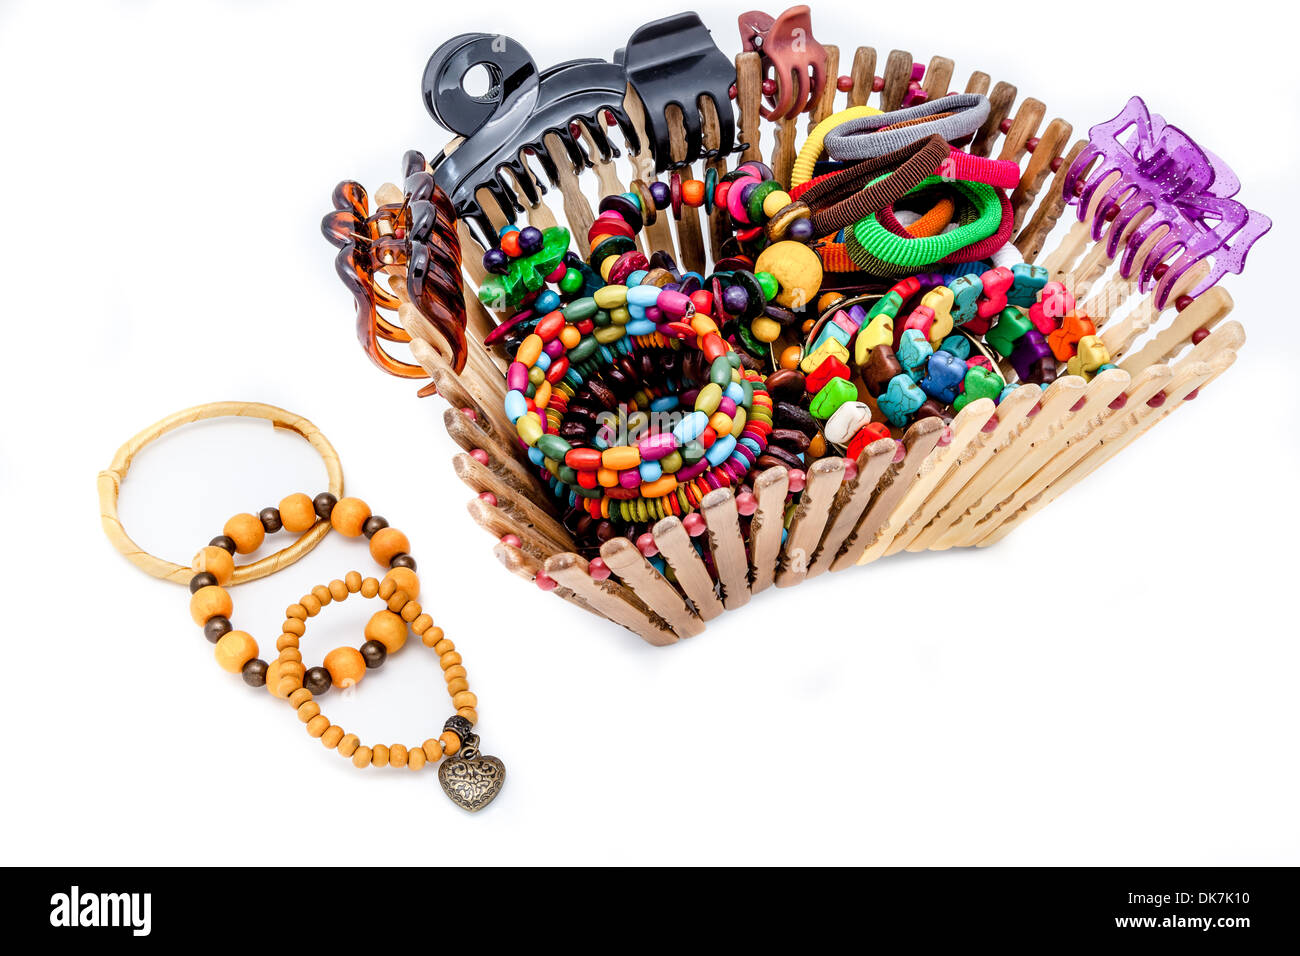 A basket of fashion accessories of woman on a white background Stock Photo